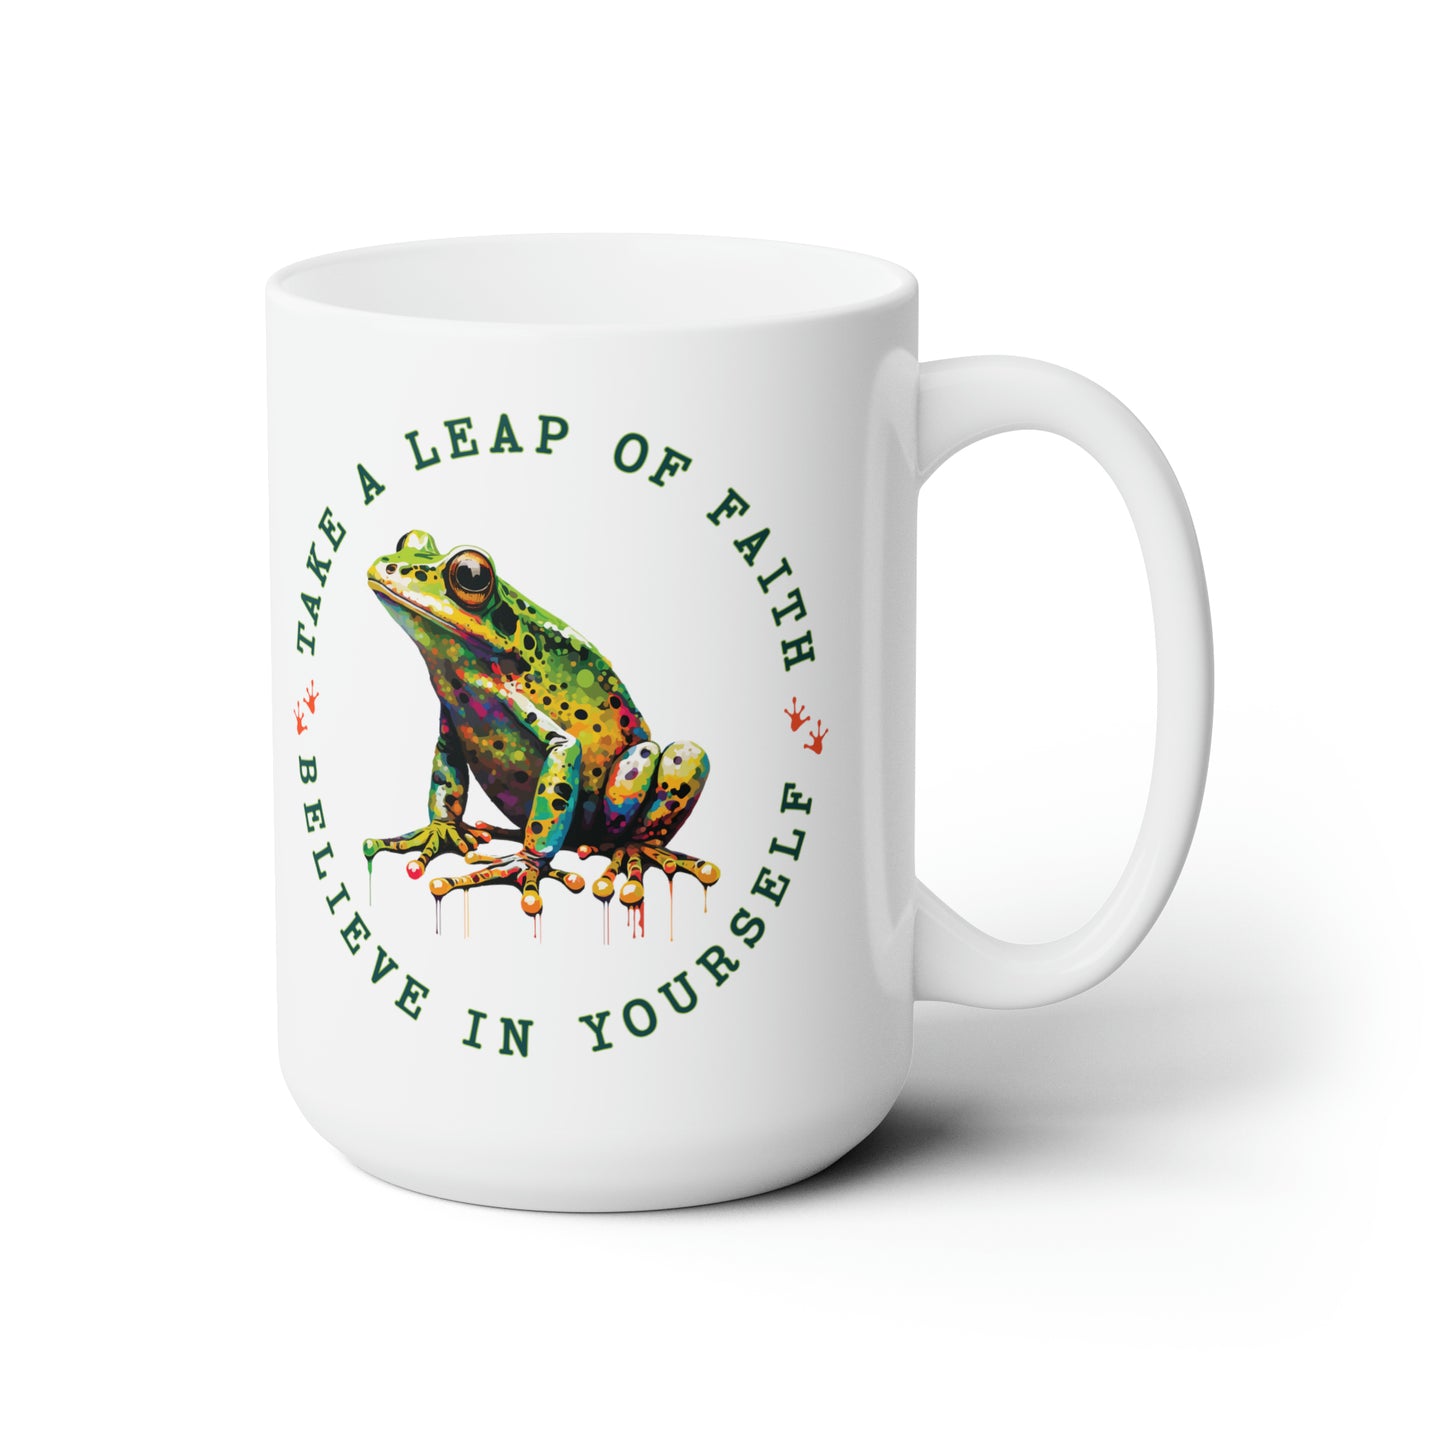 Tree Frog Coffee Mug For Leap Of Faith Hot Tea Cup For Inspirational Gift